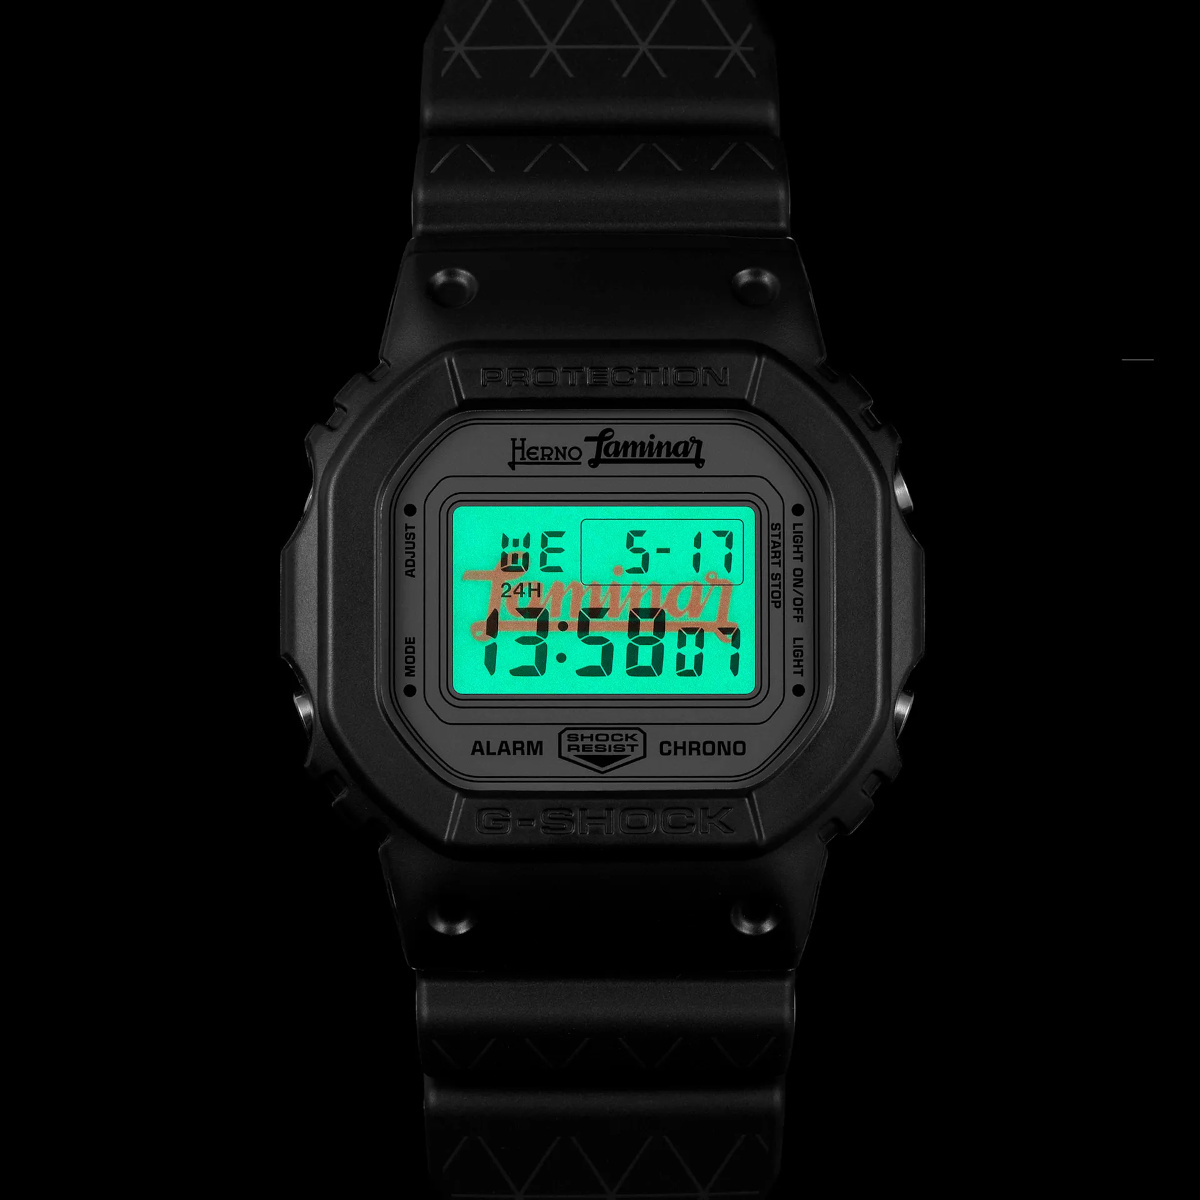 Herno Laminar x G-Shock DW-5600 for 10th anniversary of Herno 